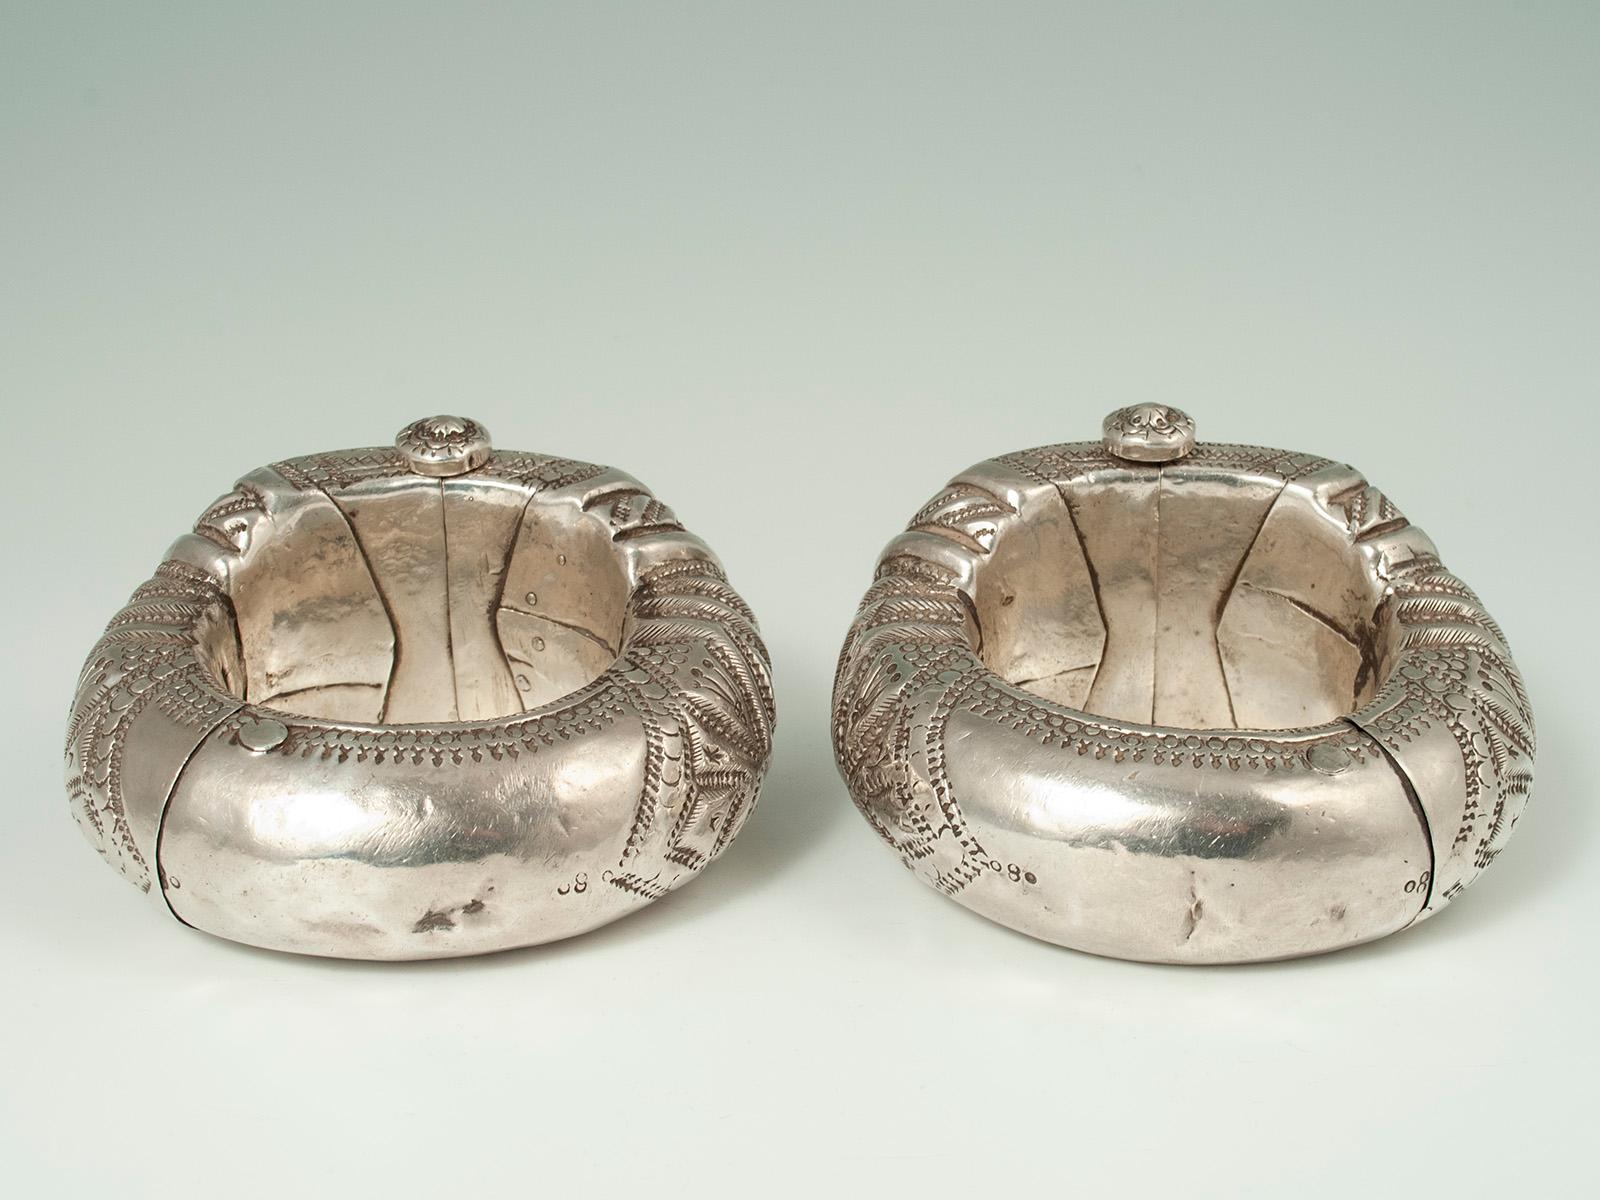 Omani Late 19th to Early 20th Century Silver Anklets, Oman